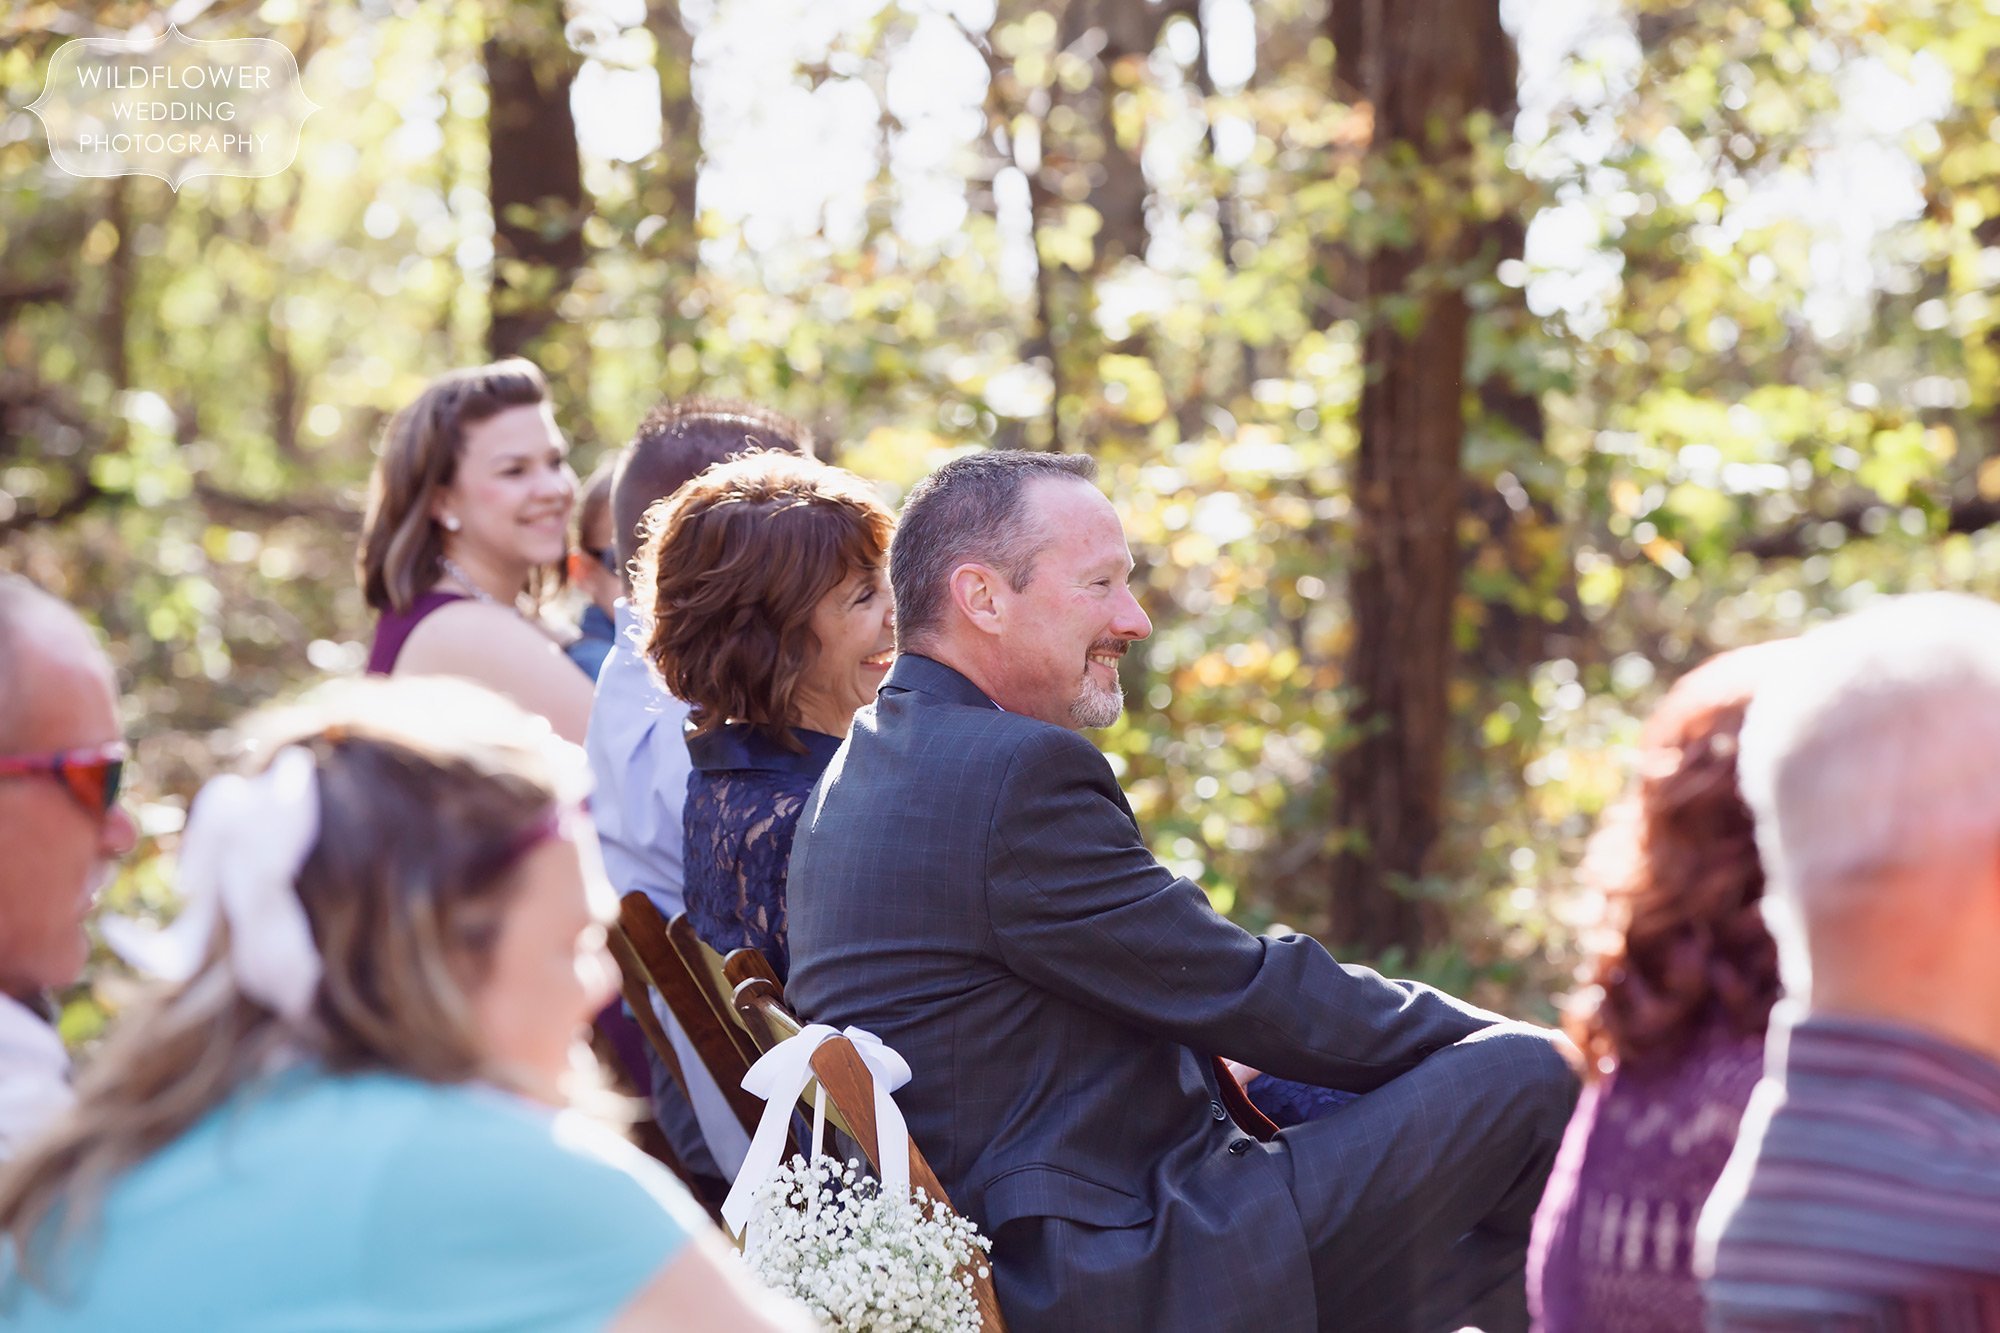 Wedding guests watch the rustic ceremony at the Schwinn Produce Farm.